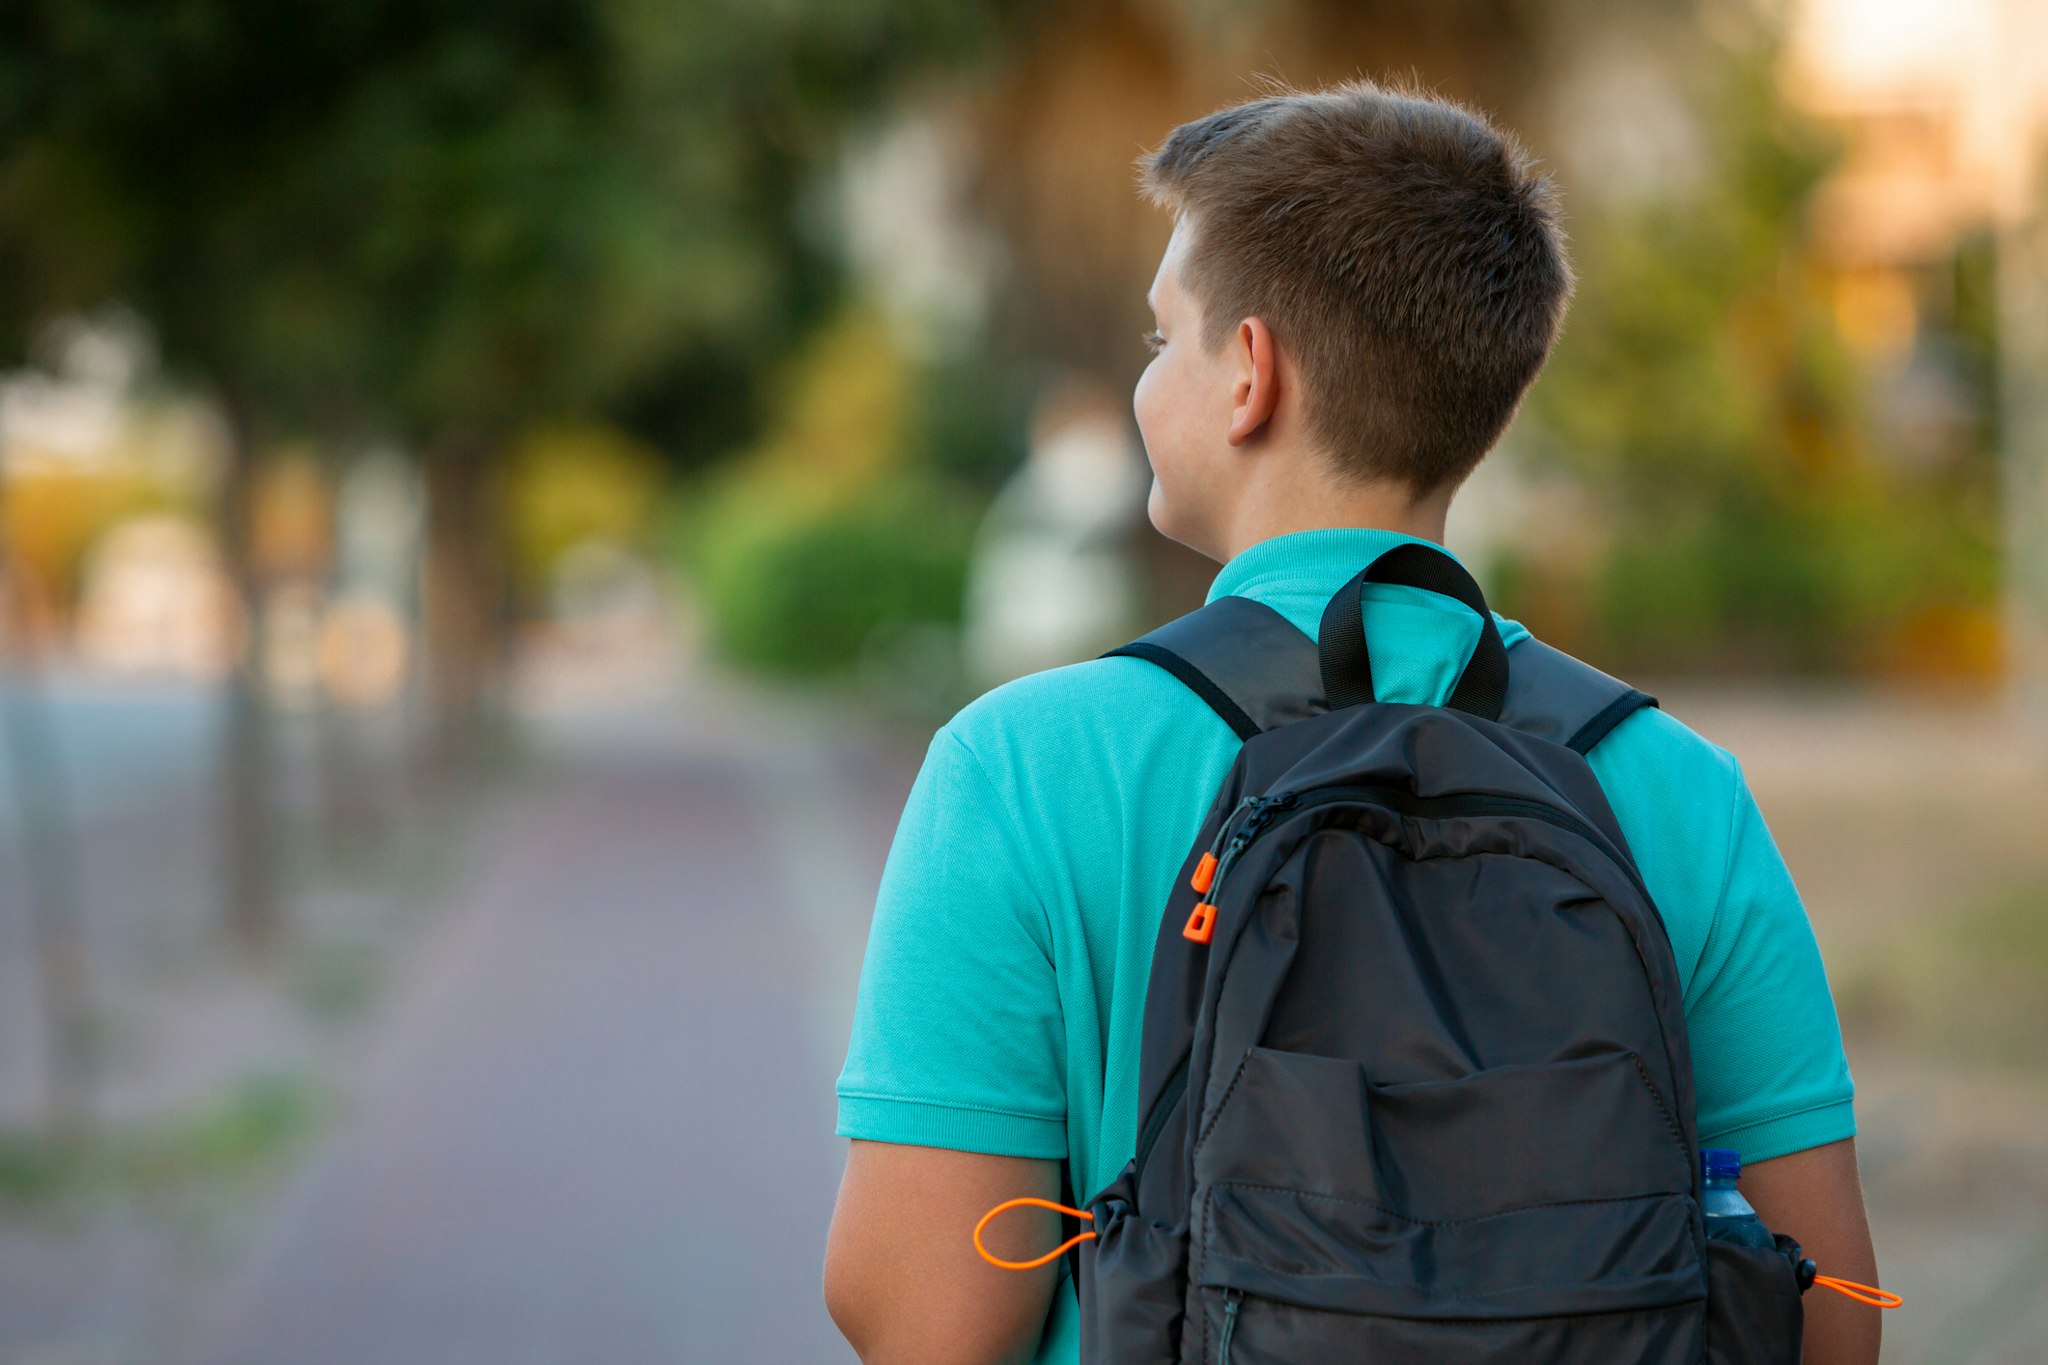 Radiating enthusiasm and dressed in a vibrant turquoise T-shirt, a cheerful teen boy stands ready for school with a backpack in hand. His joyful expression reflects a genuine love for learning as he embraces the excitement of a new day. The warm glow of late daytime enhances the scene, casting a positive light on this junior adventurer's journey into the world of education. This image captures the spirit of youthful exuberance and the anticipation of new discoveries in the school environment.